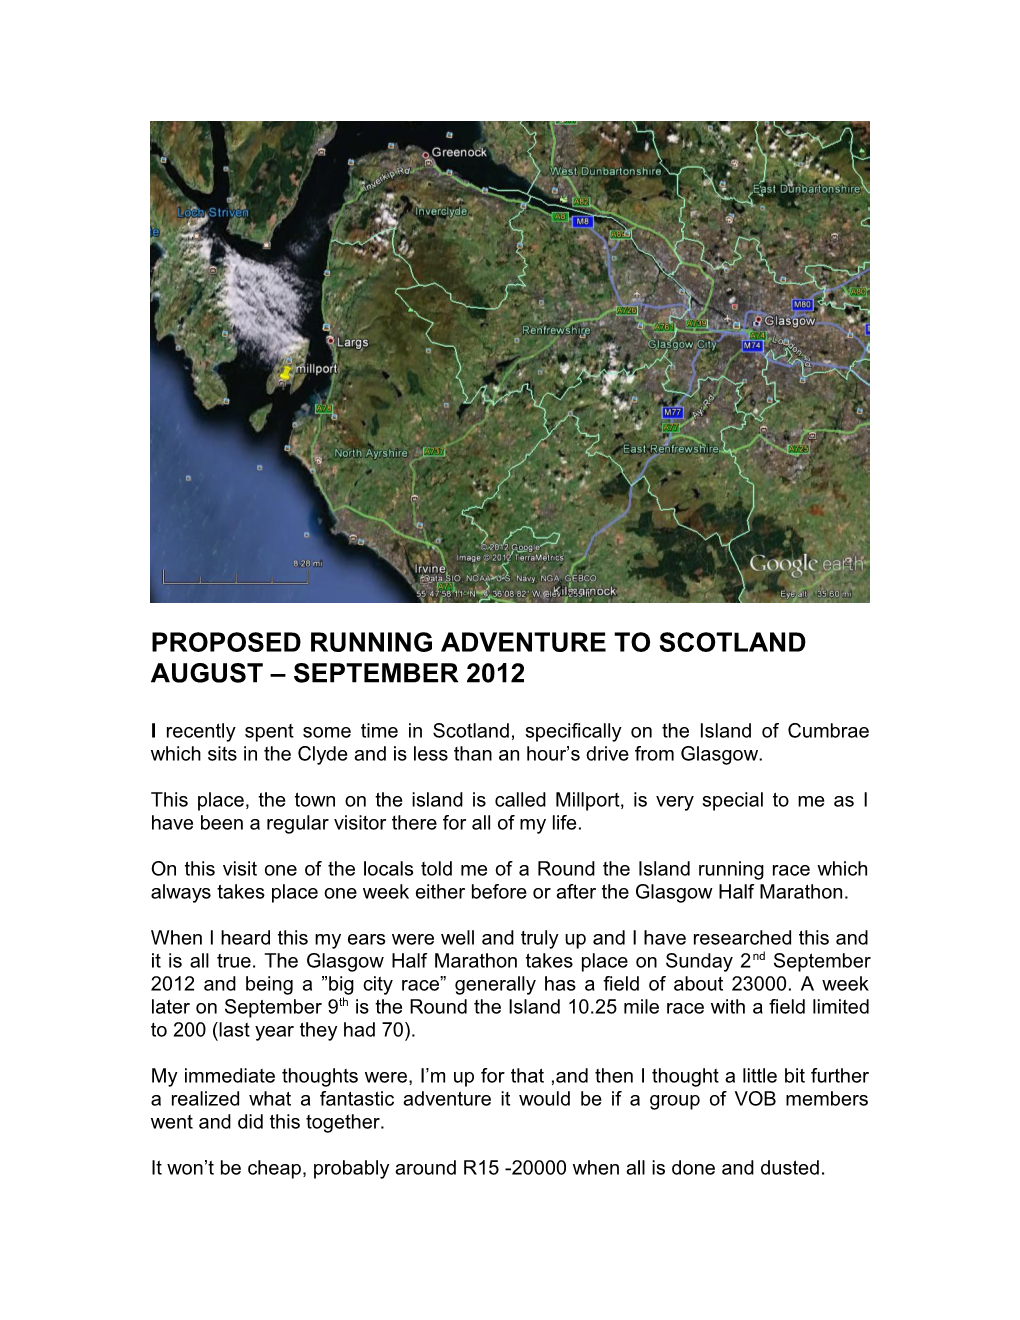 Proposed Running Adventure to Scotland August September 2012